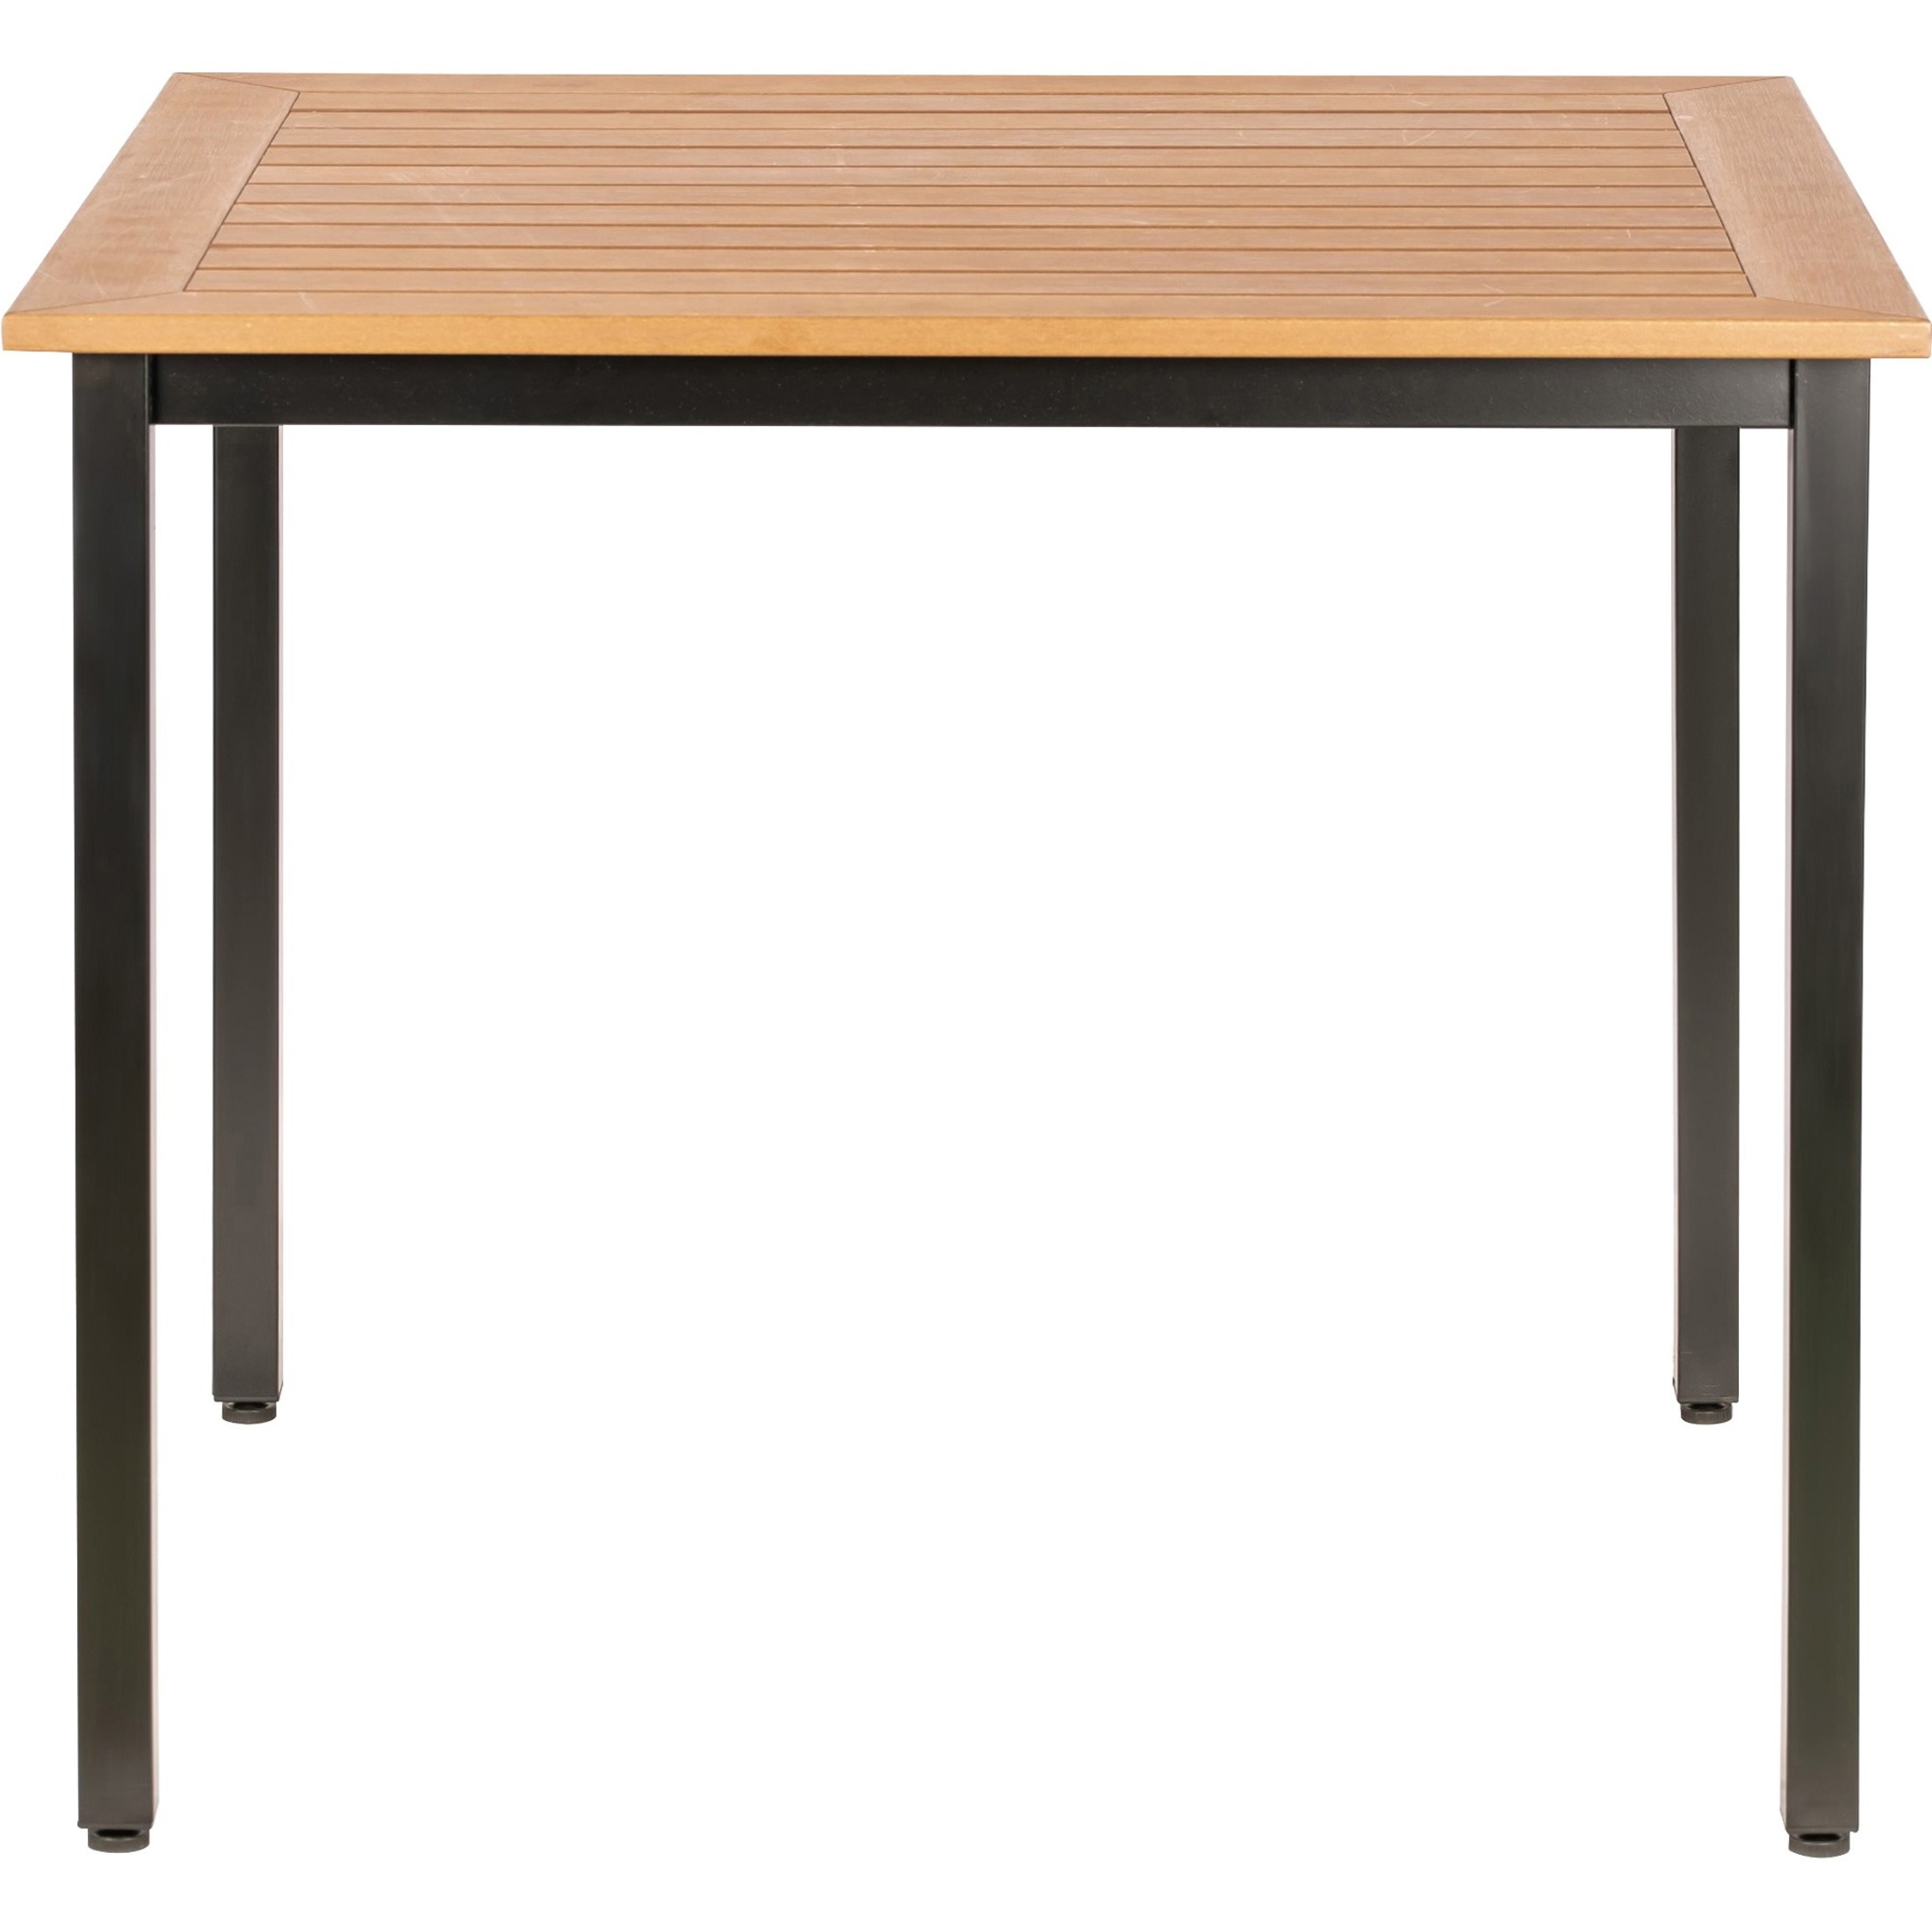 Lorell, Teak Outdoor Table, 1 Each - image 2 of 4